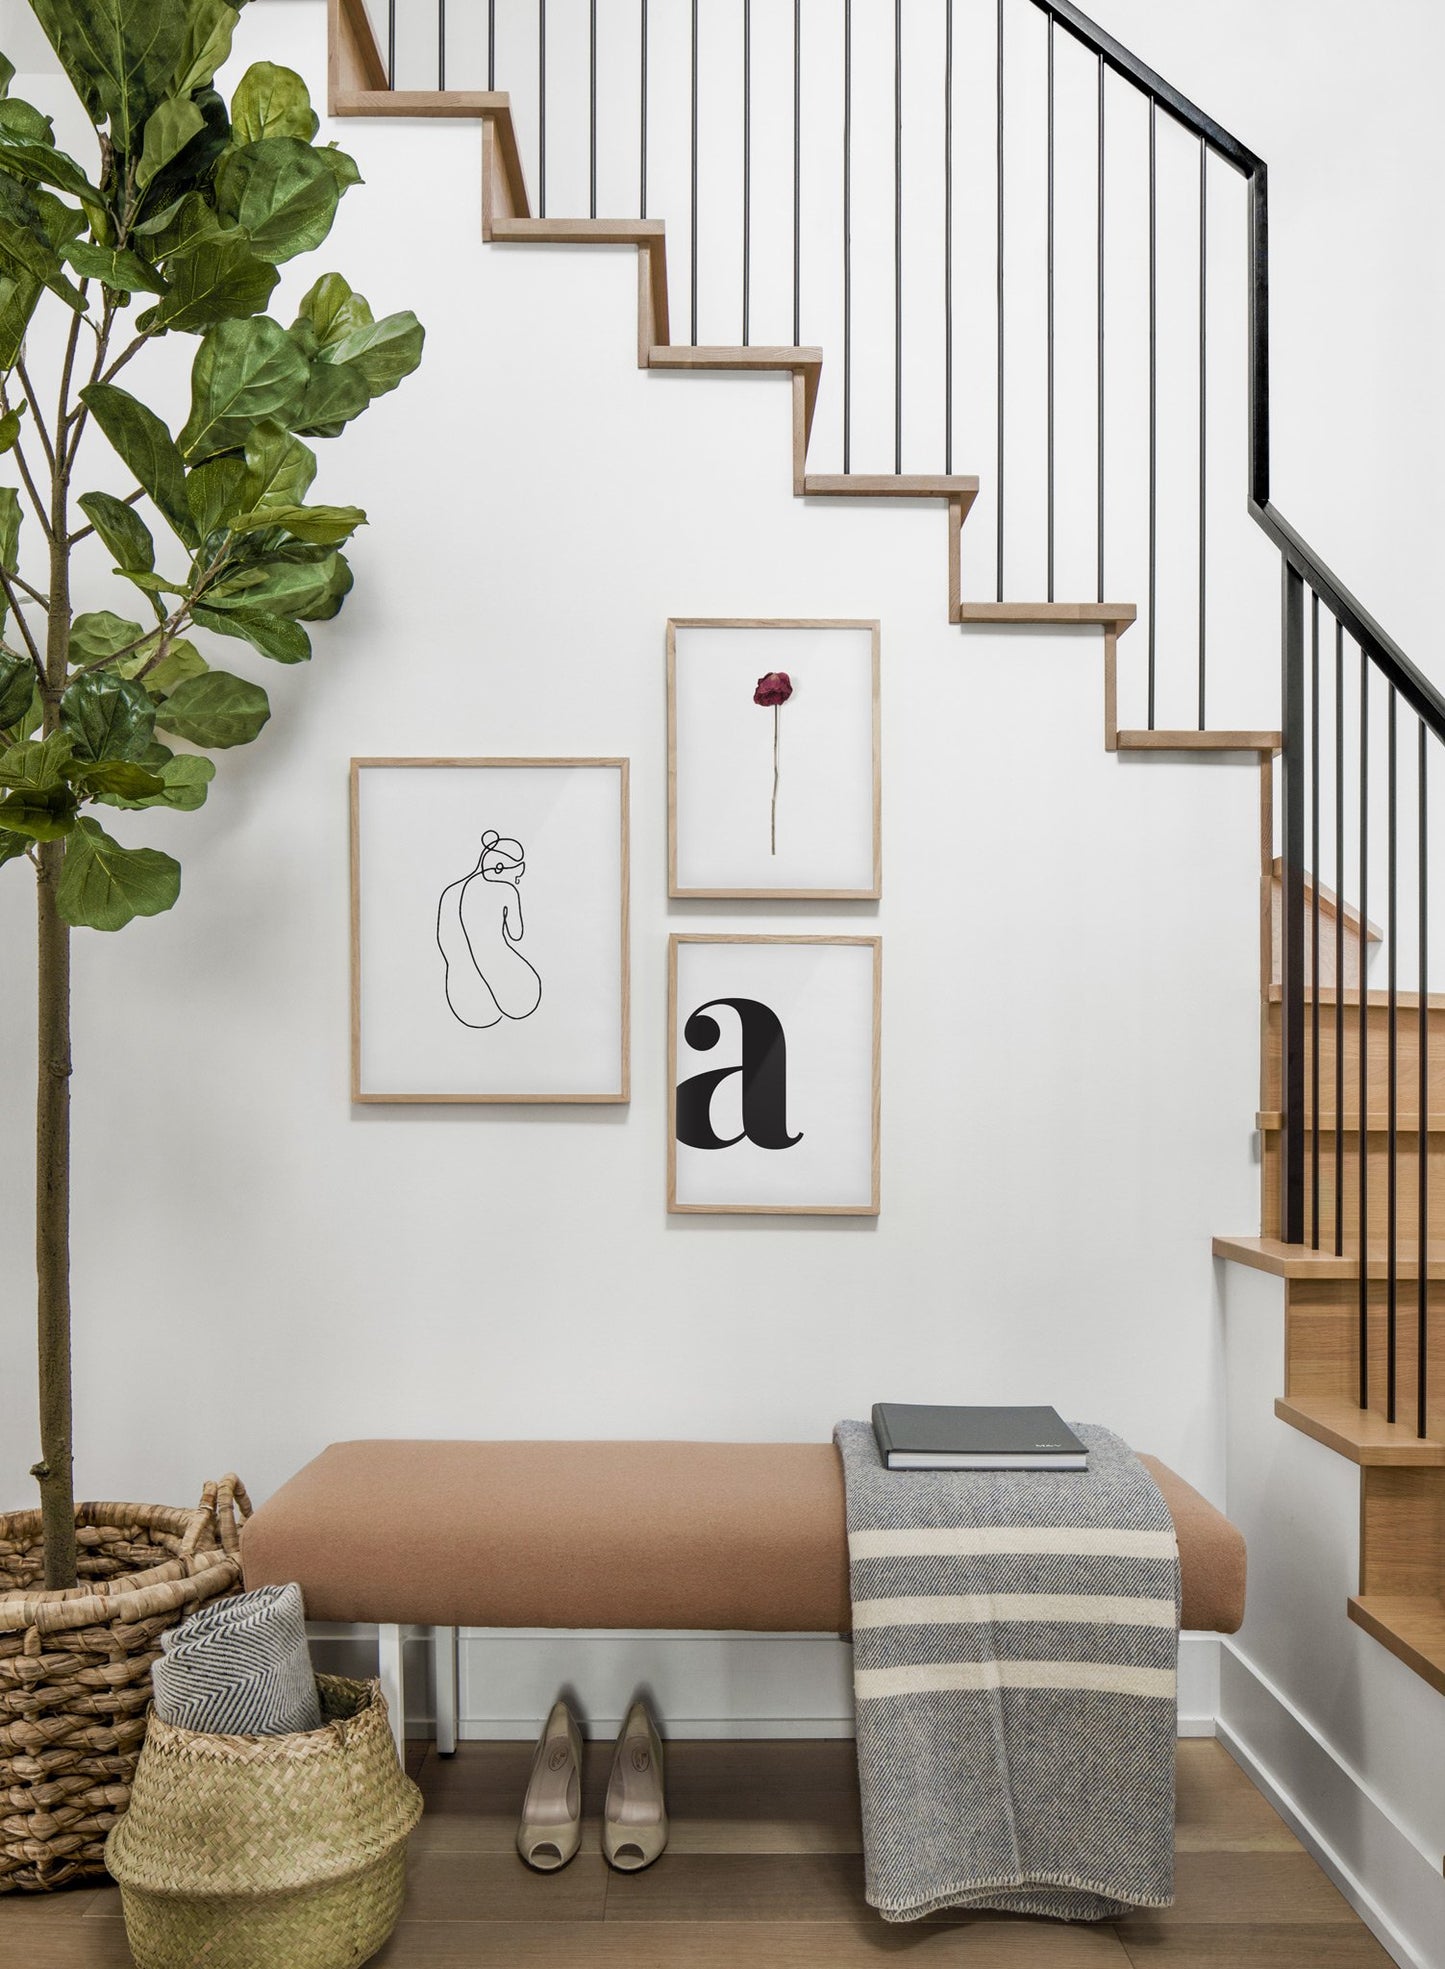 Scandinavian poster by Opposite Wall with black and white graphic typography design of the letter A - Hallway with staircase